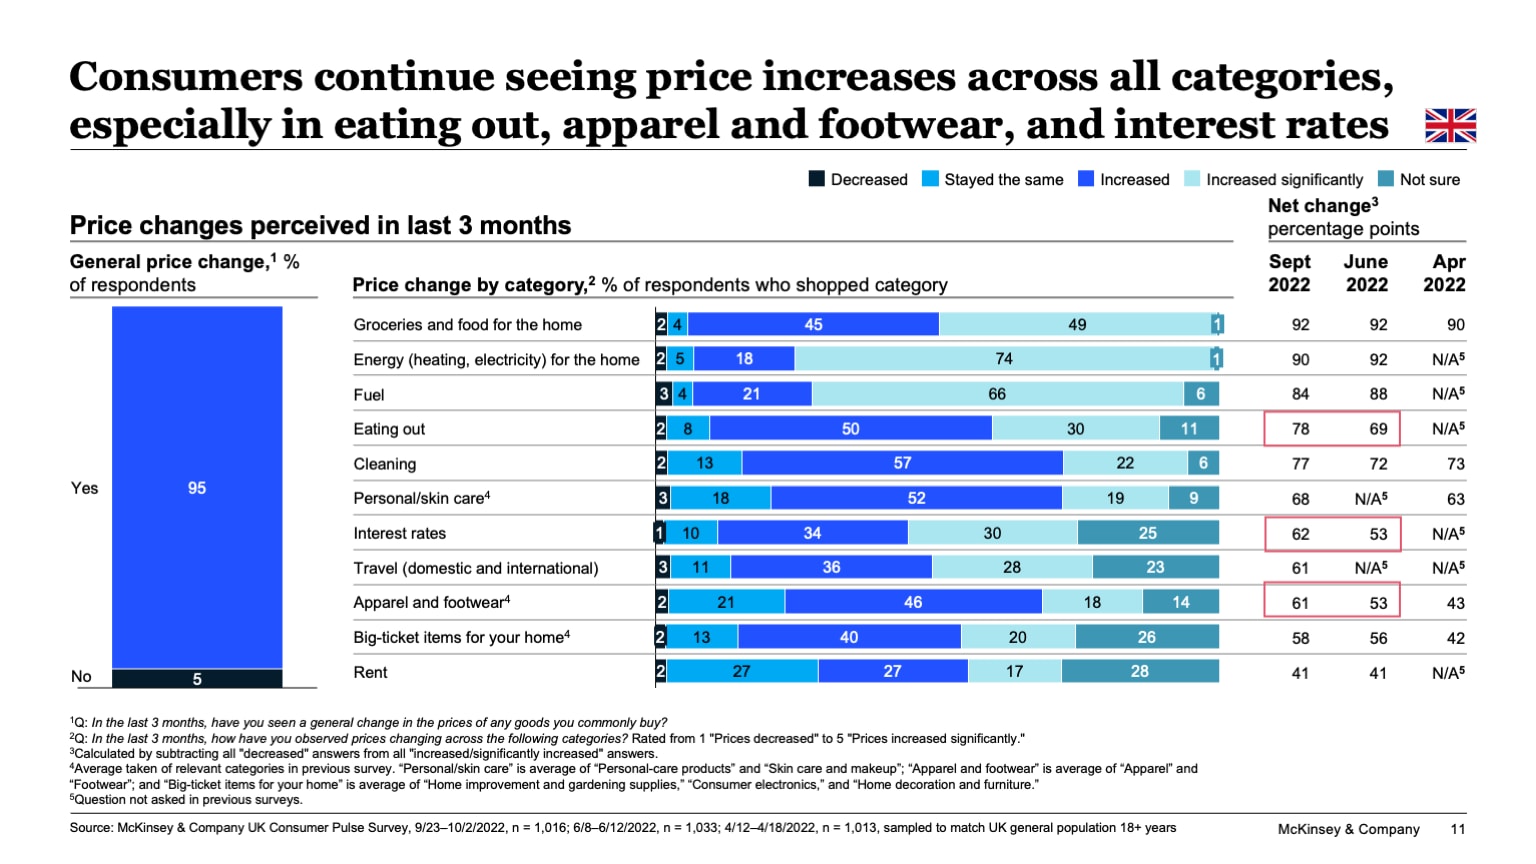 Consumers continue seeing price increases across all categories, especially in eating out, apparel and footwear, and interest rates